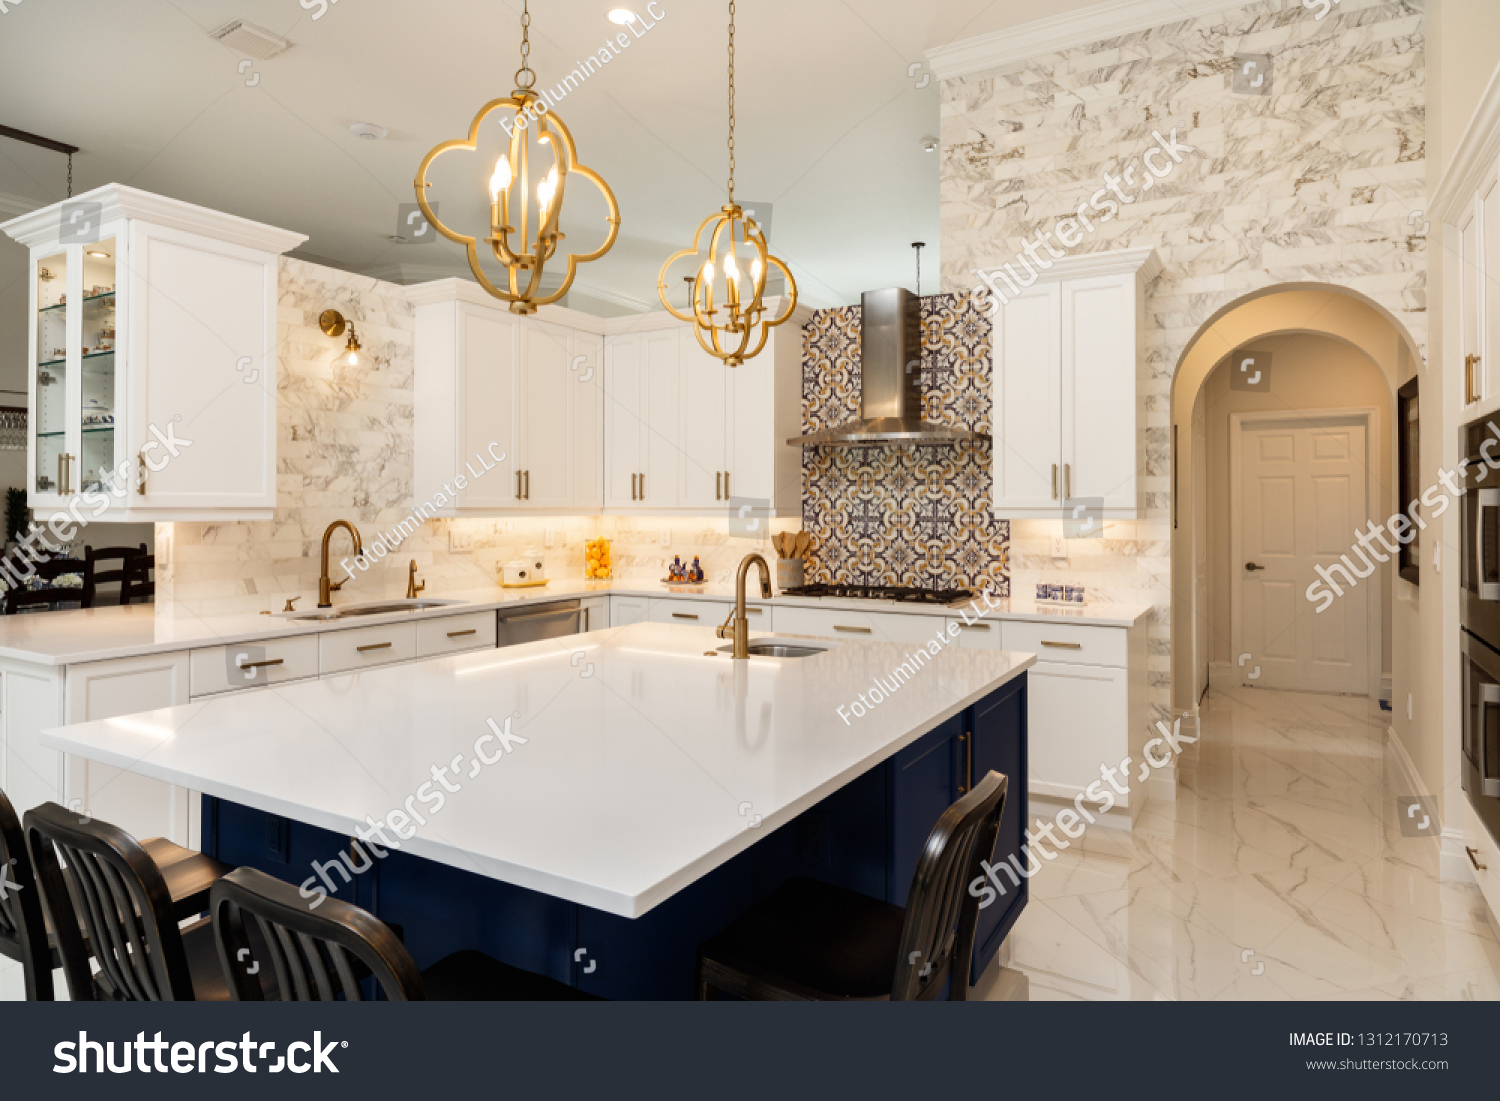 Beautiful luxury home kitchen with white cabinets. #1312170713